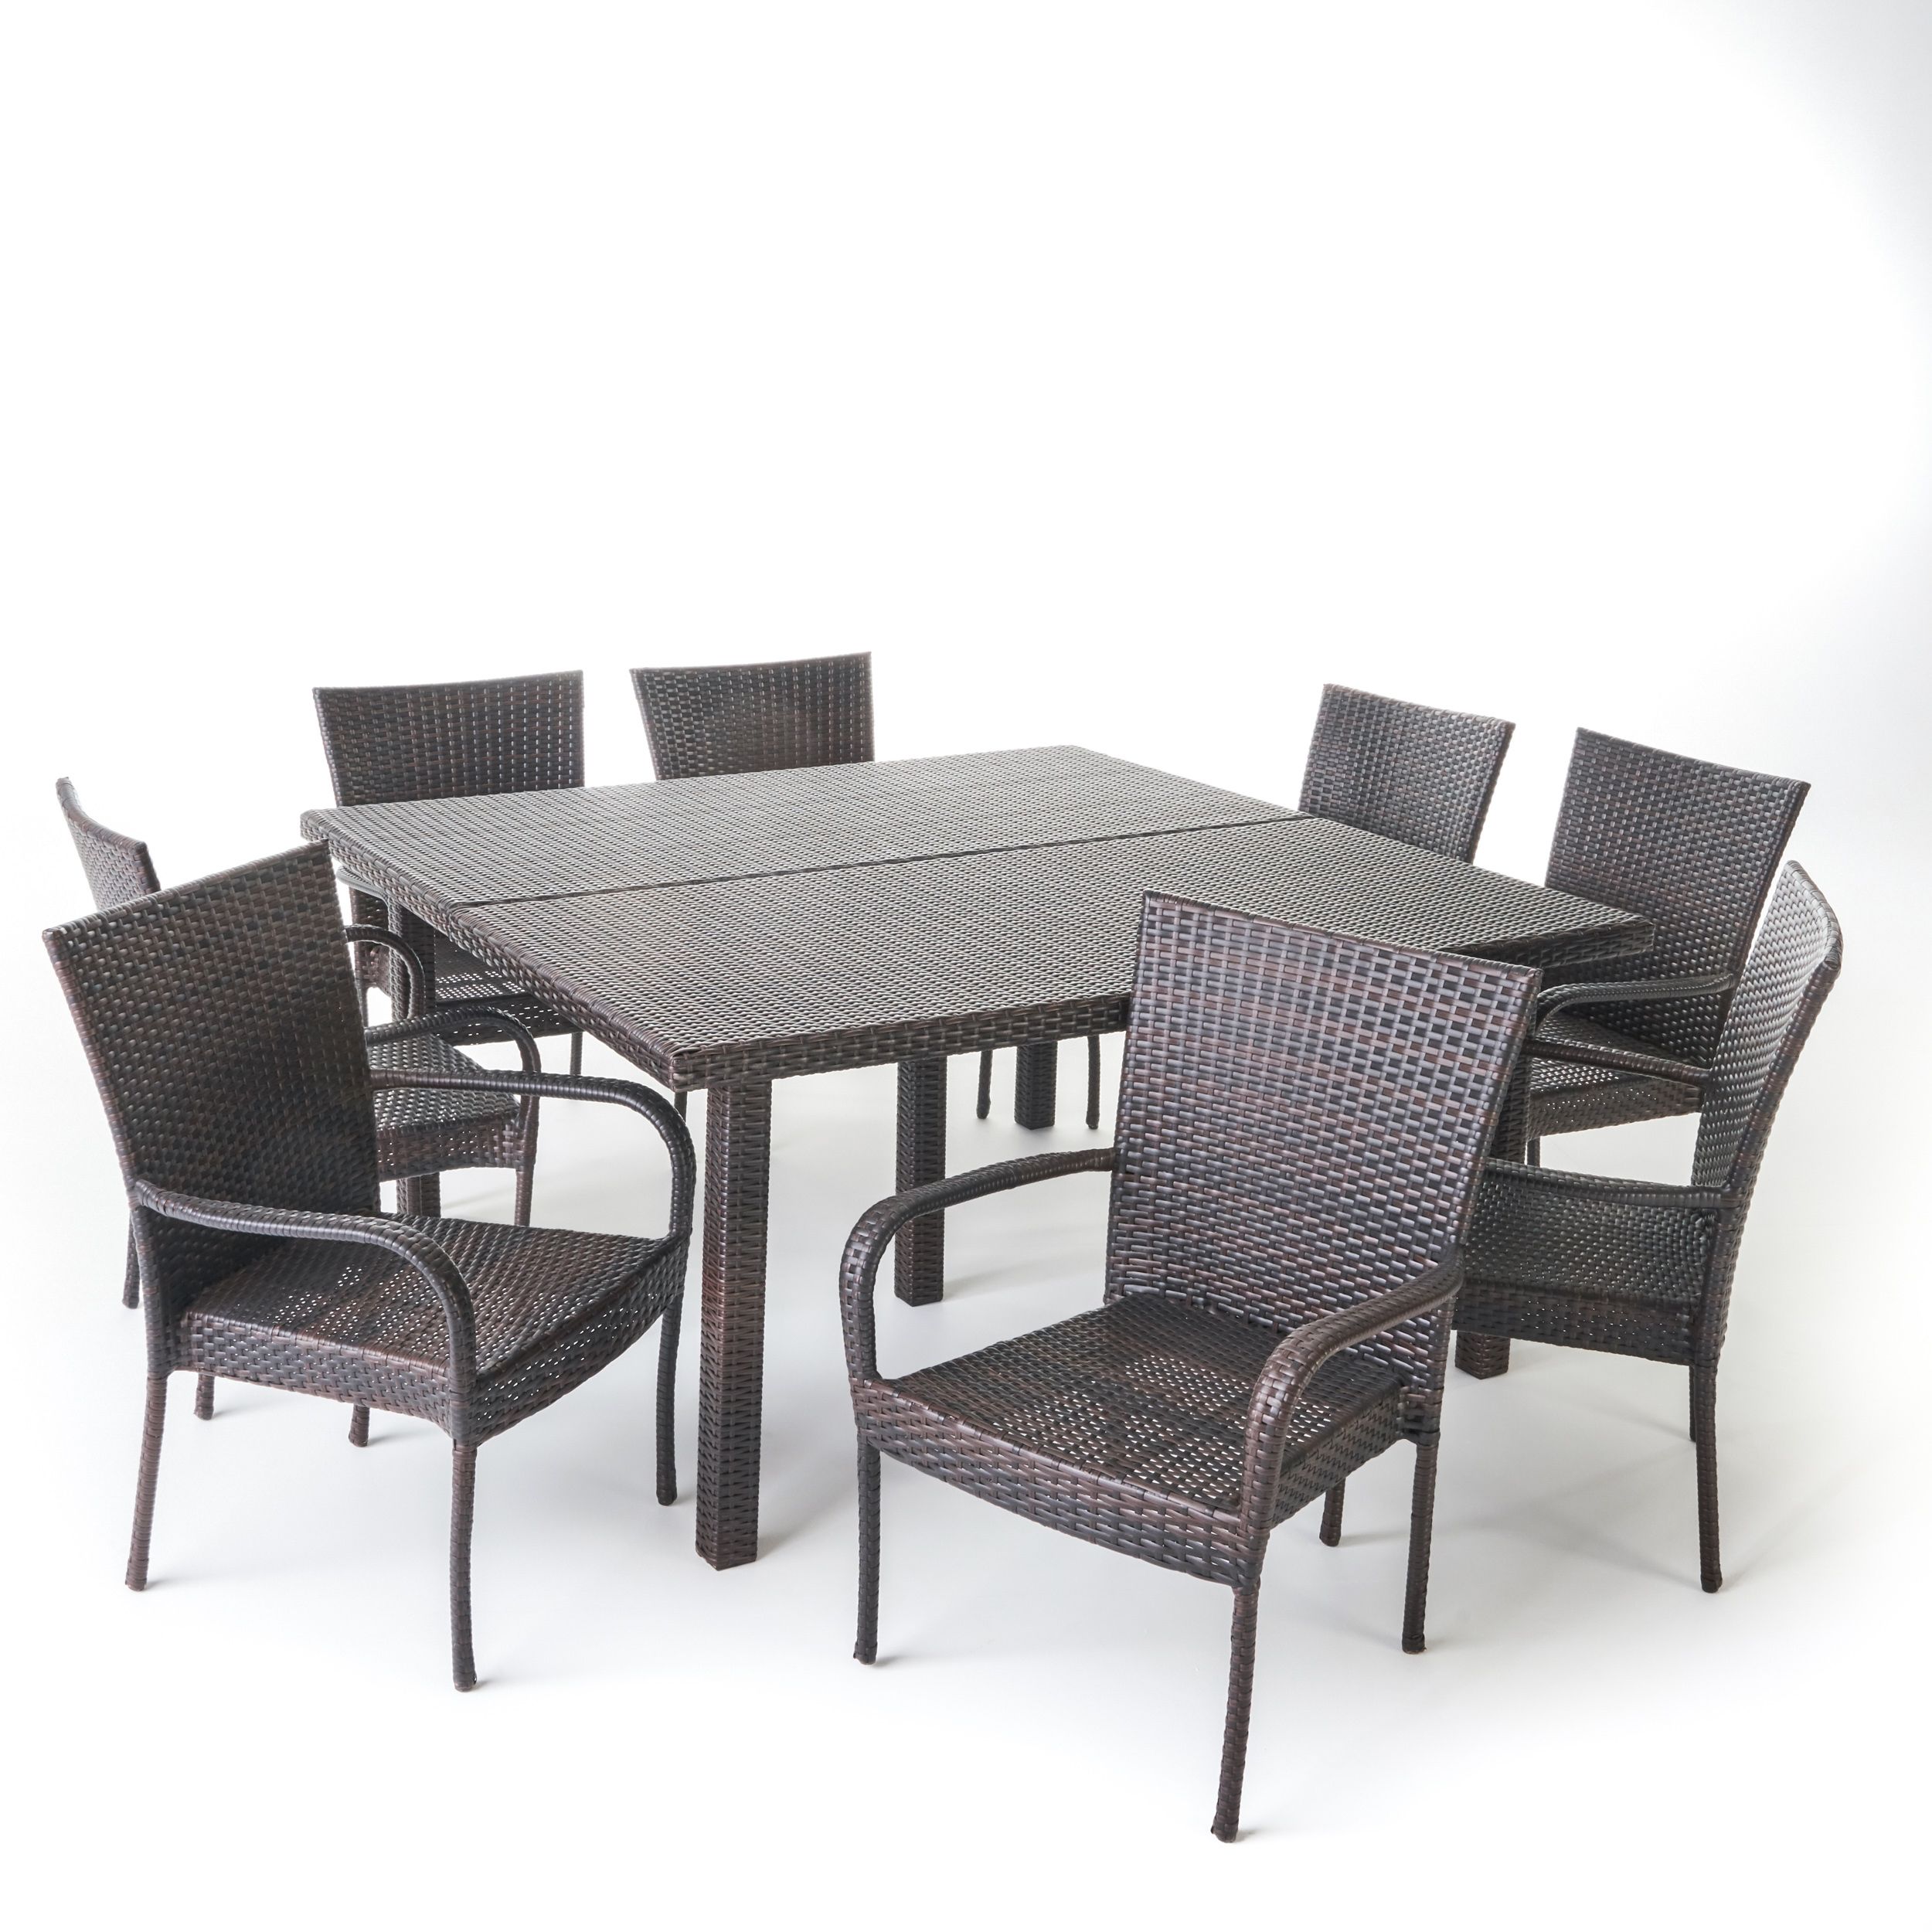 Fern Outdoor 9 Piece Stacking Wicker Square Dining Set, Multibrown Throughout 9 Piece Square Patio Dining Sets (View 5 of 15)